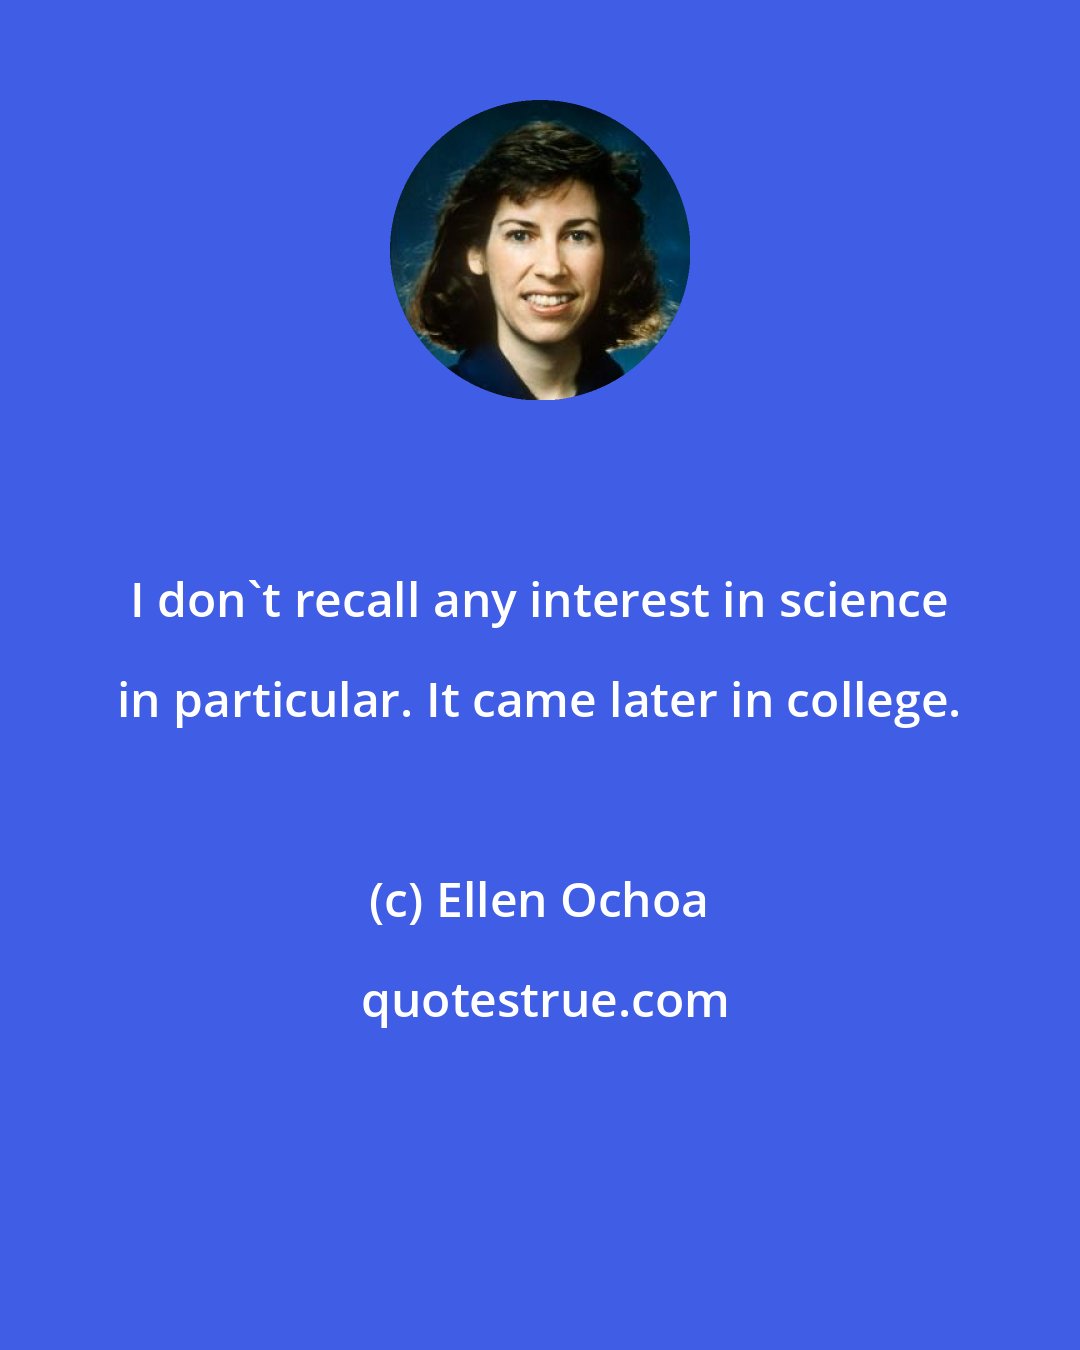 Ellen Ochoa: I don't recall any interest in science in particular. It came later in college.